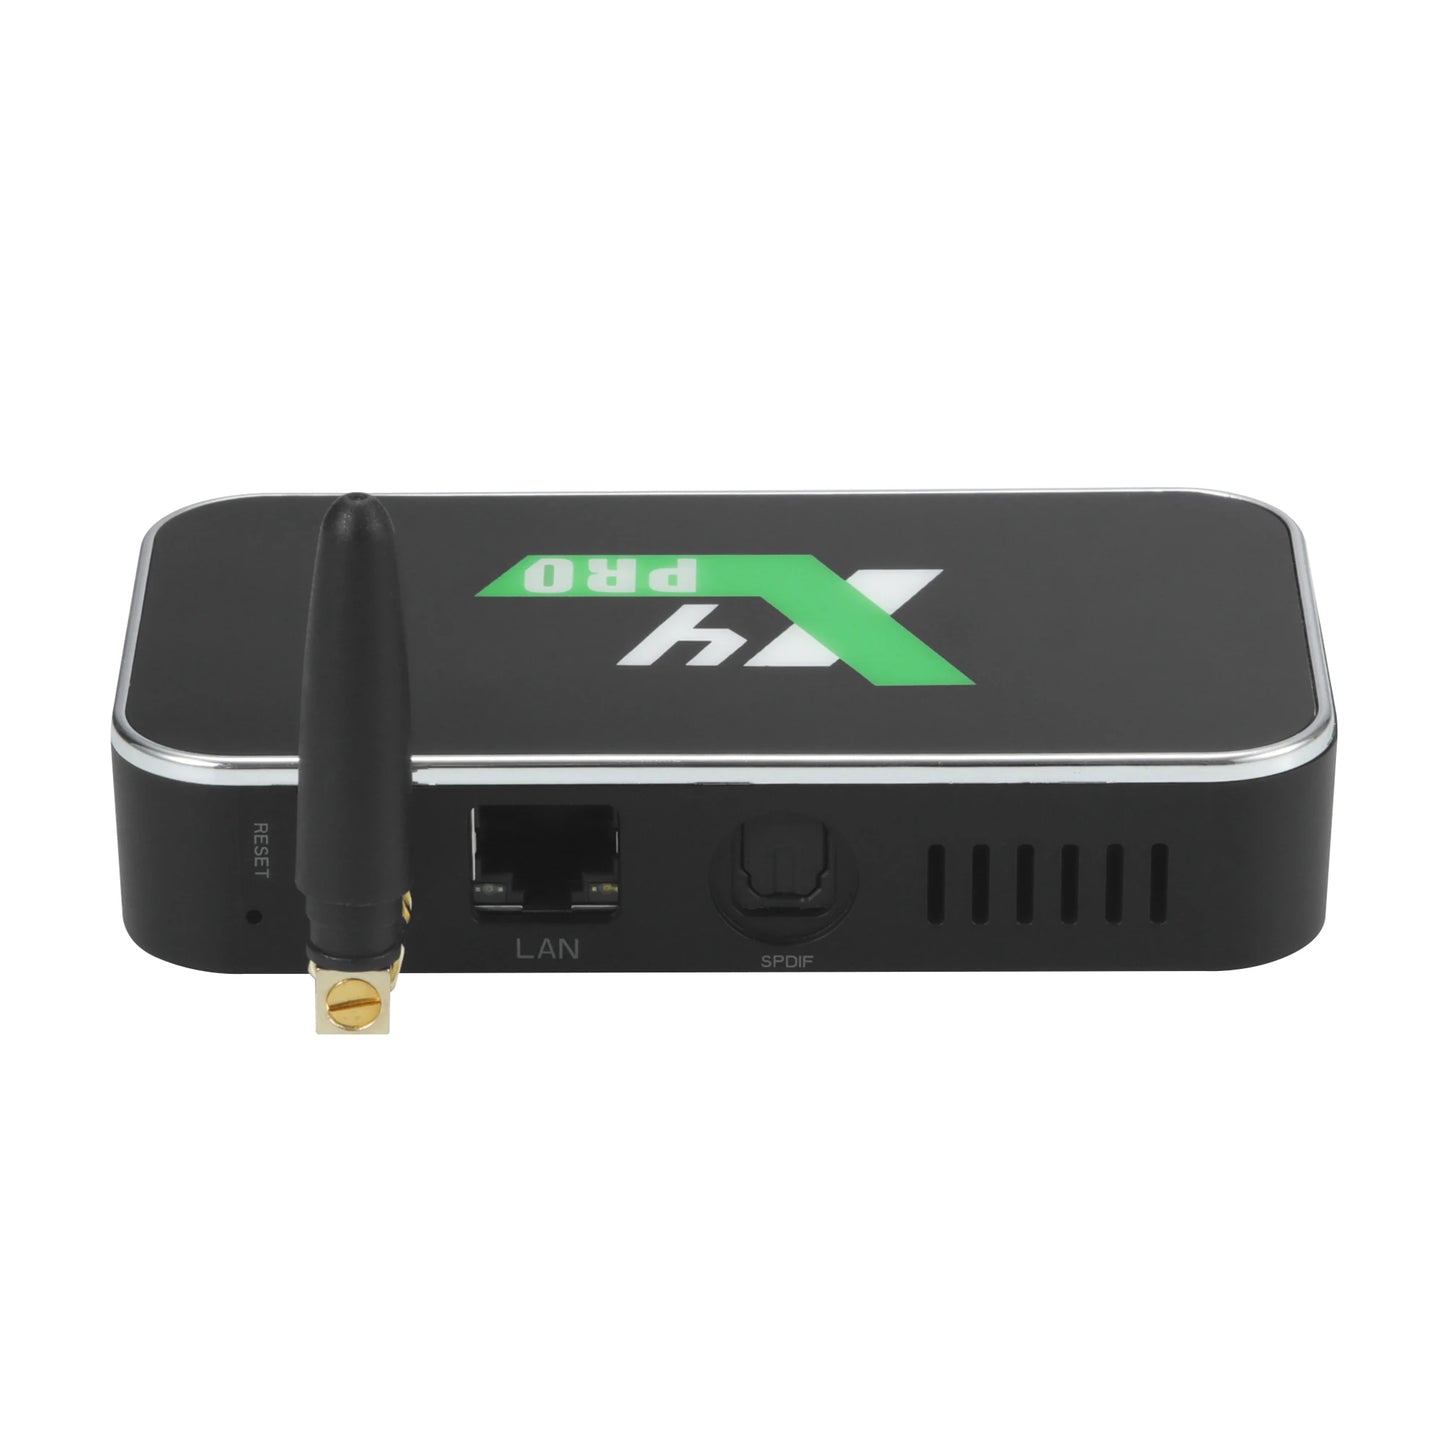 Multimedia player Ugoos X4 Pro Android Box 4GB RAM, 32GB ROM, S905X4 CPU (Smart TV Console)